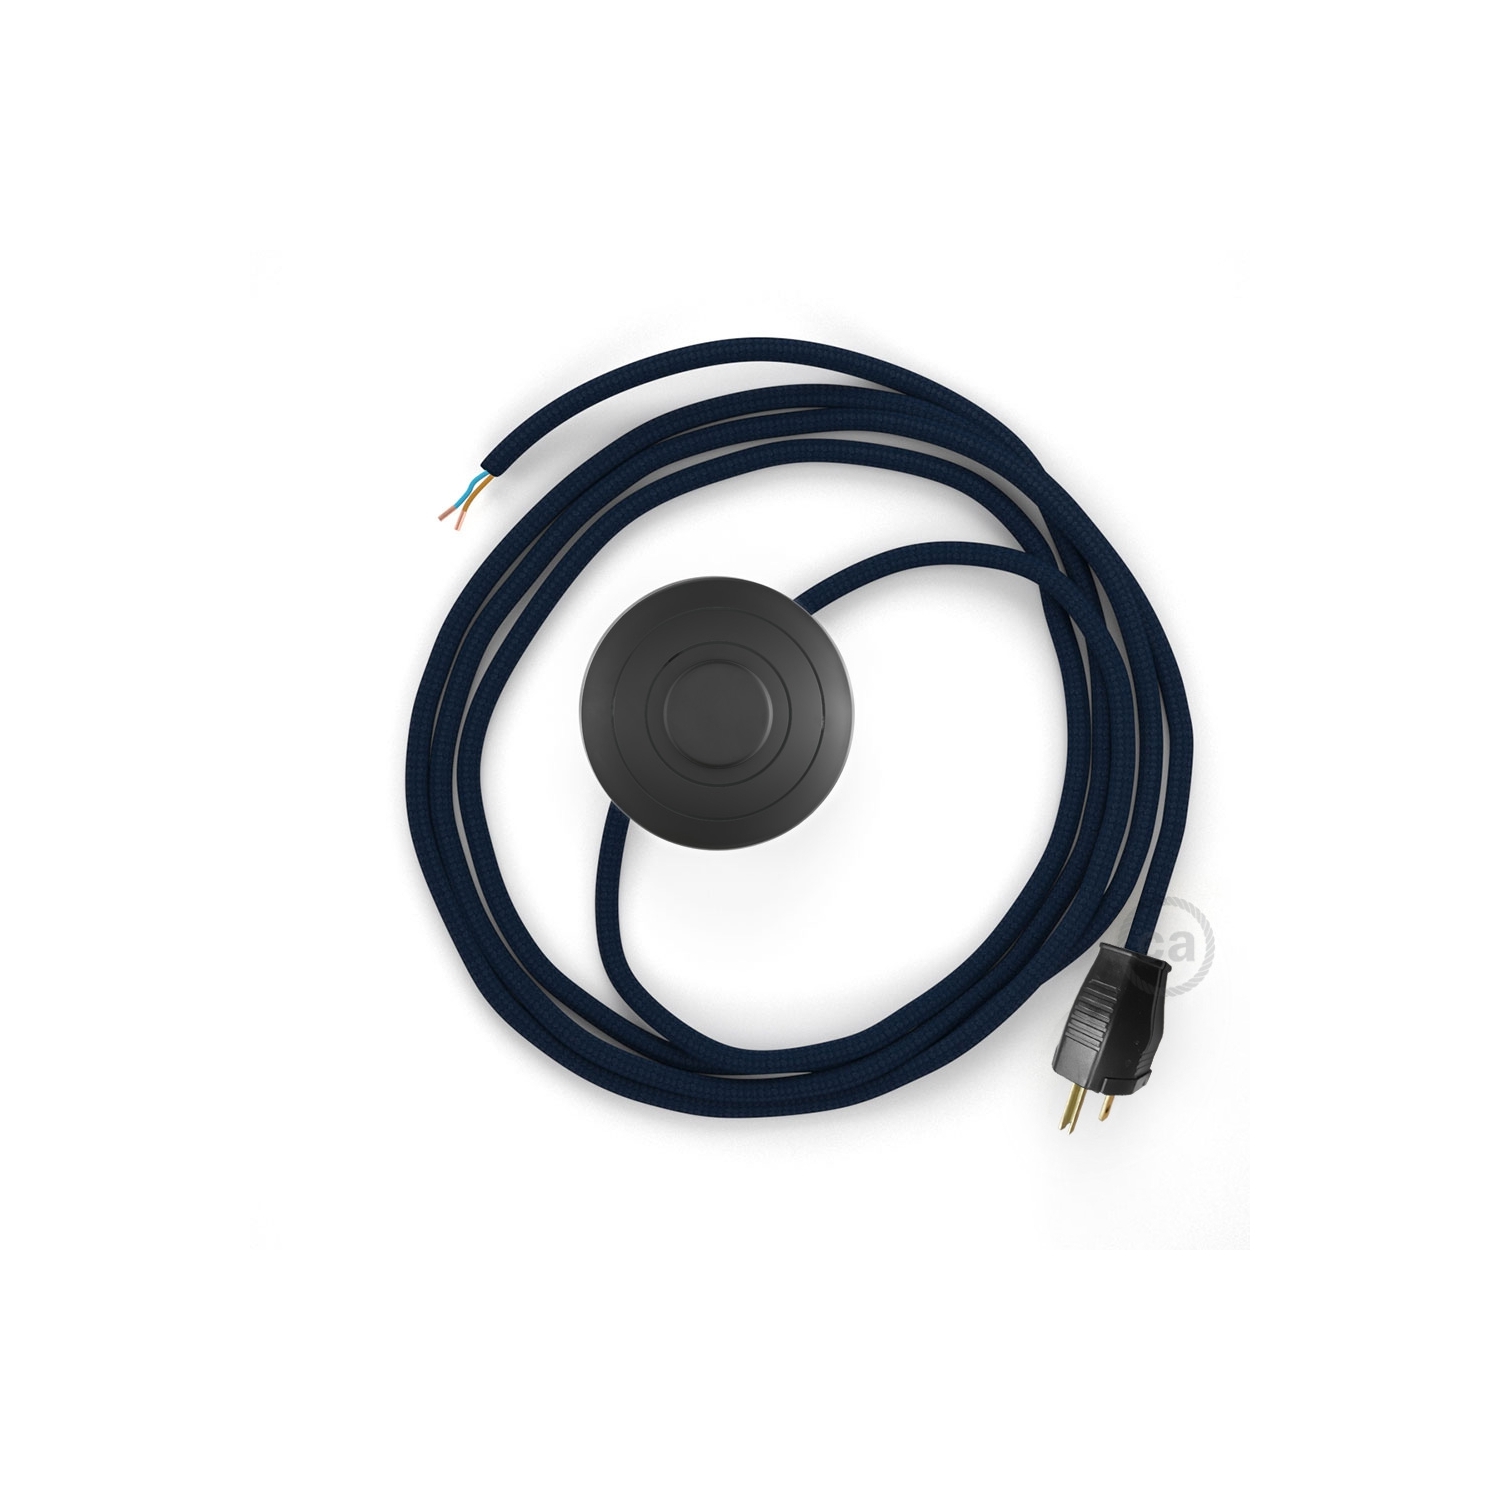 Power Cord with foot switch, RM20 Dark Blue Rayon - Choose color of switch/plug